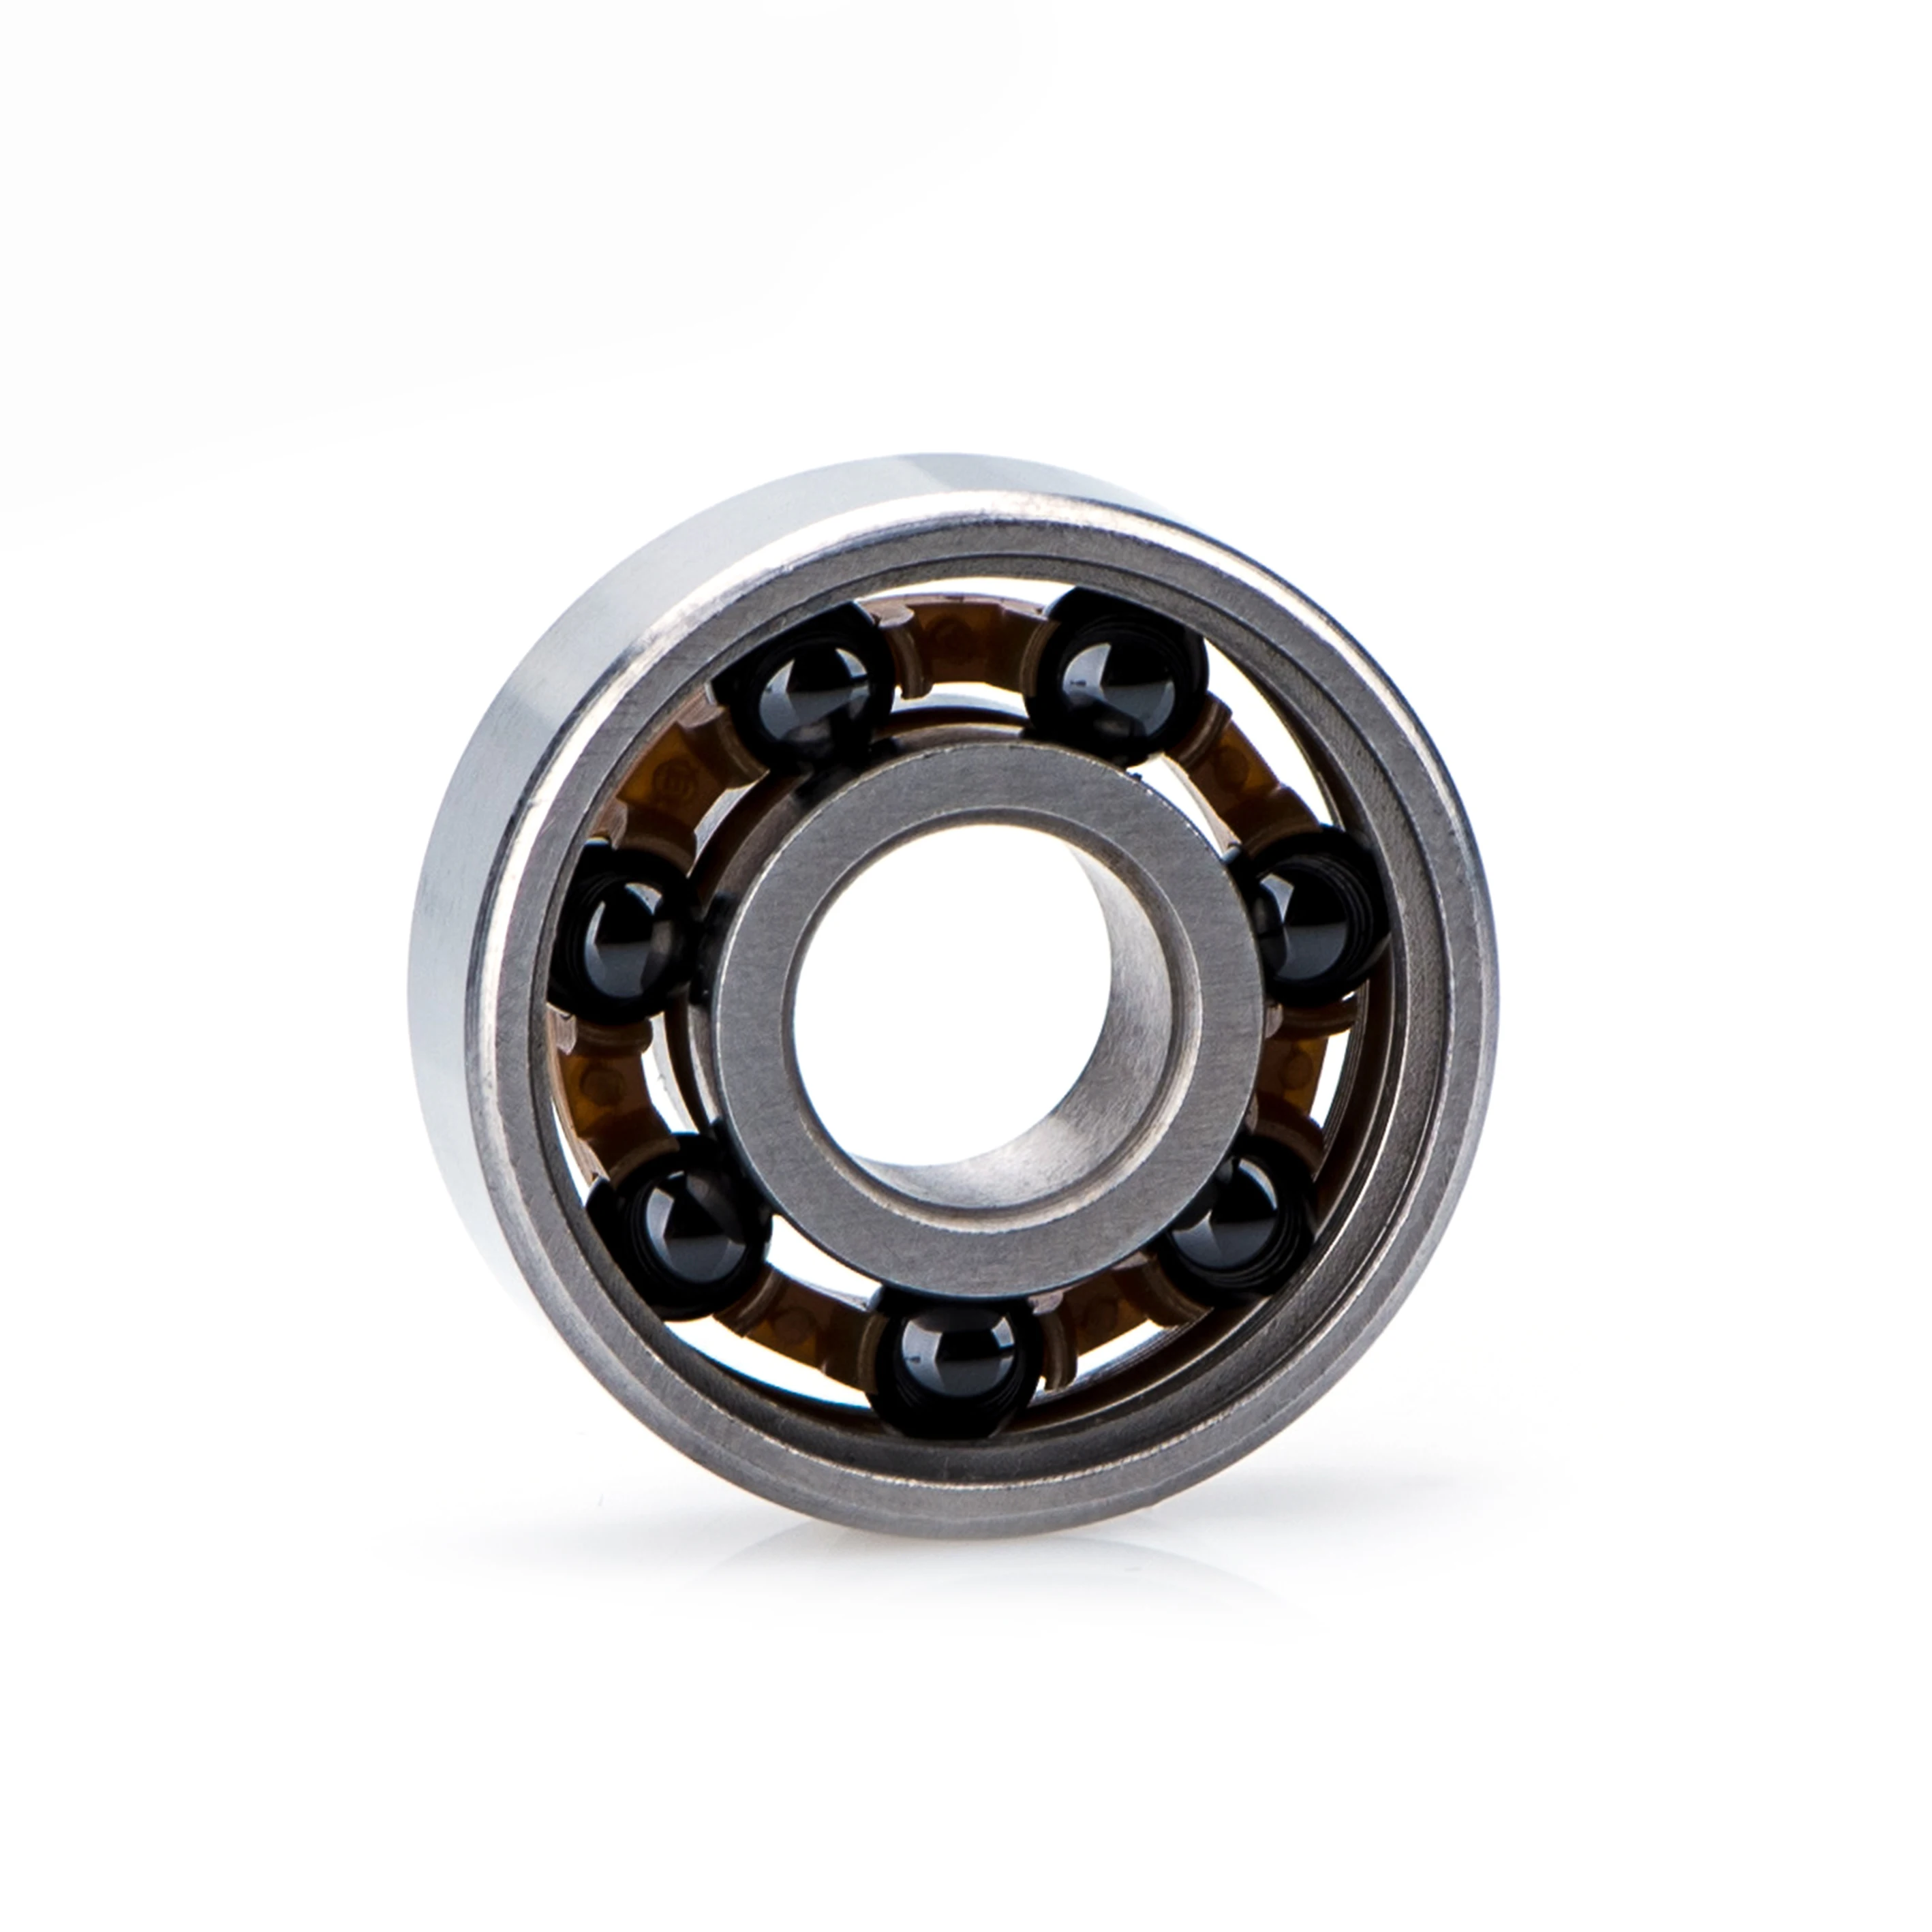 Long Life Stainless Steel Gcr15 6308 Hybrid Ceramic Bearing with Si3N4 ZrO2